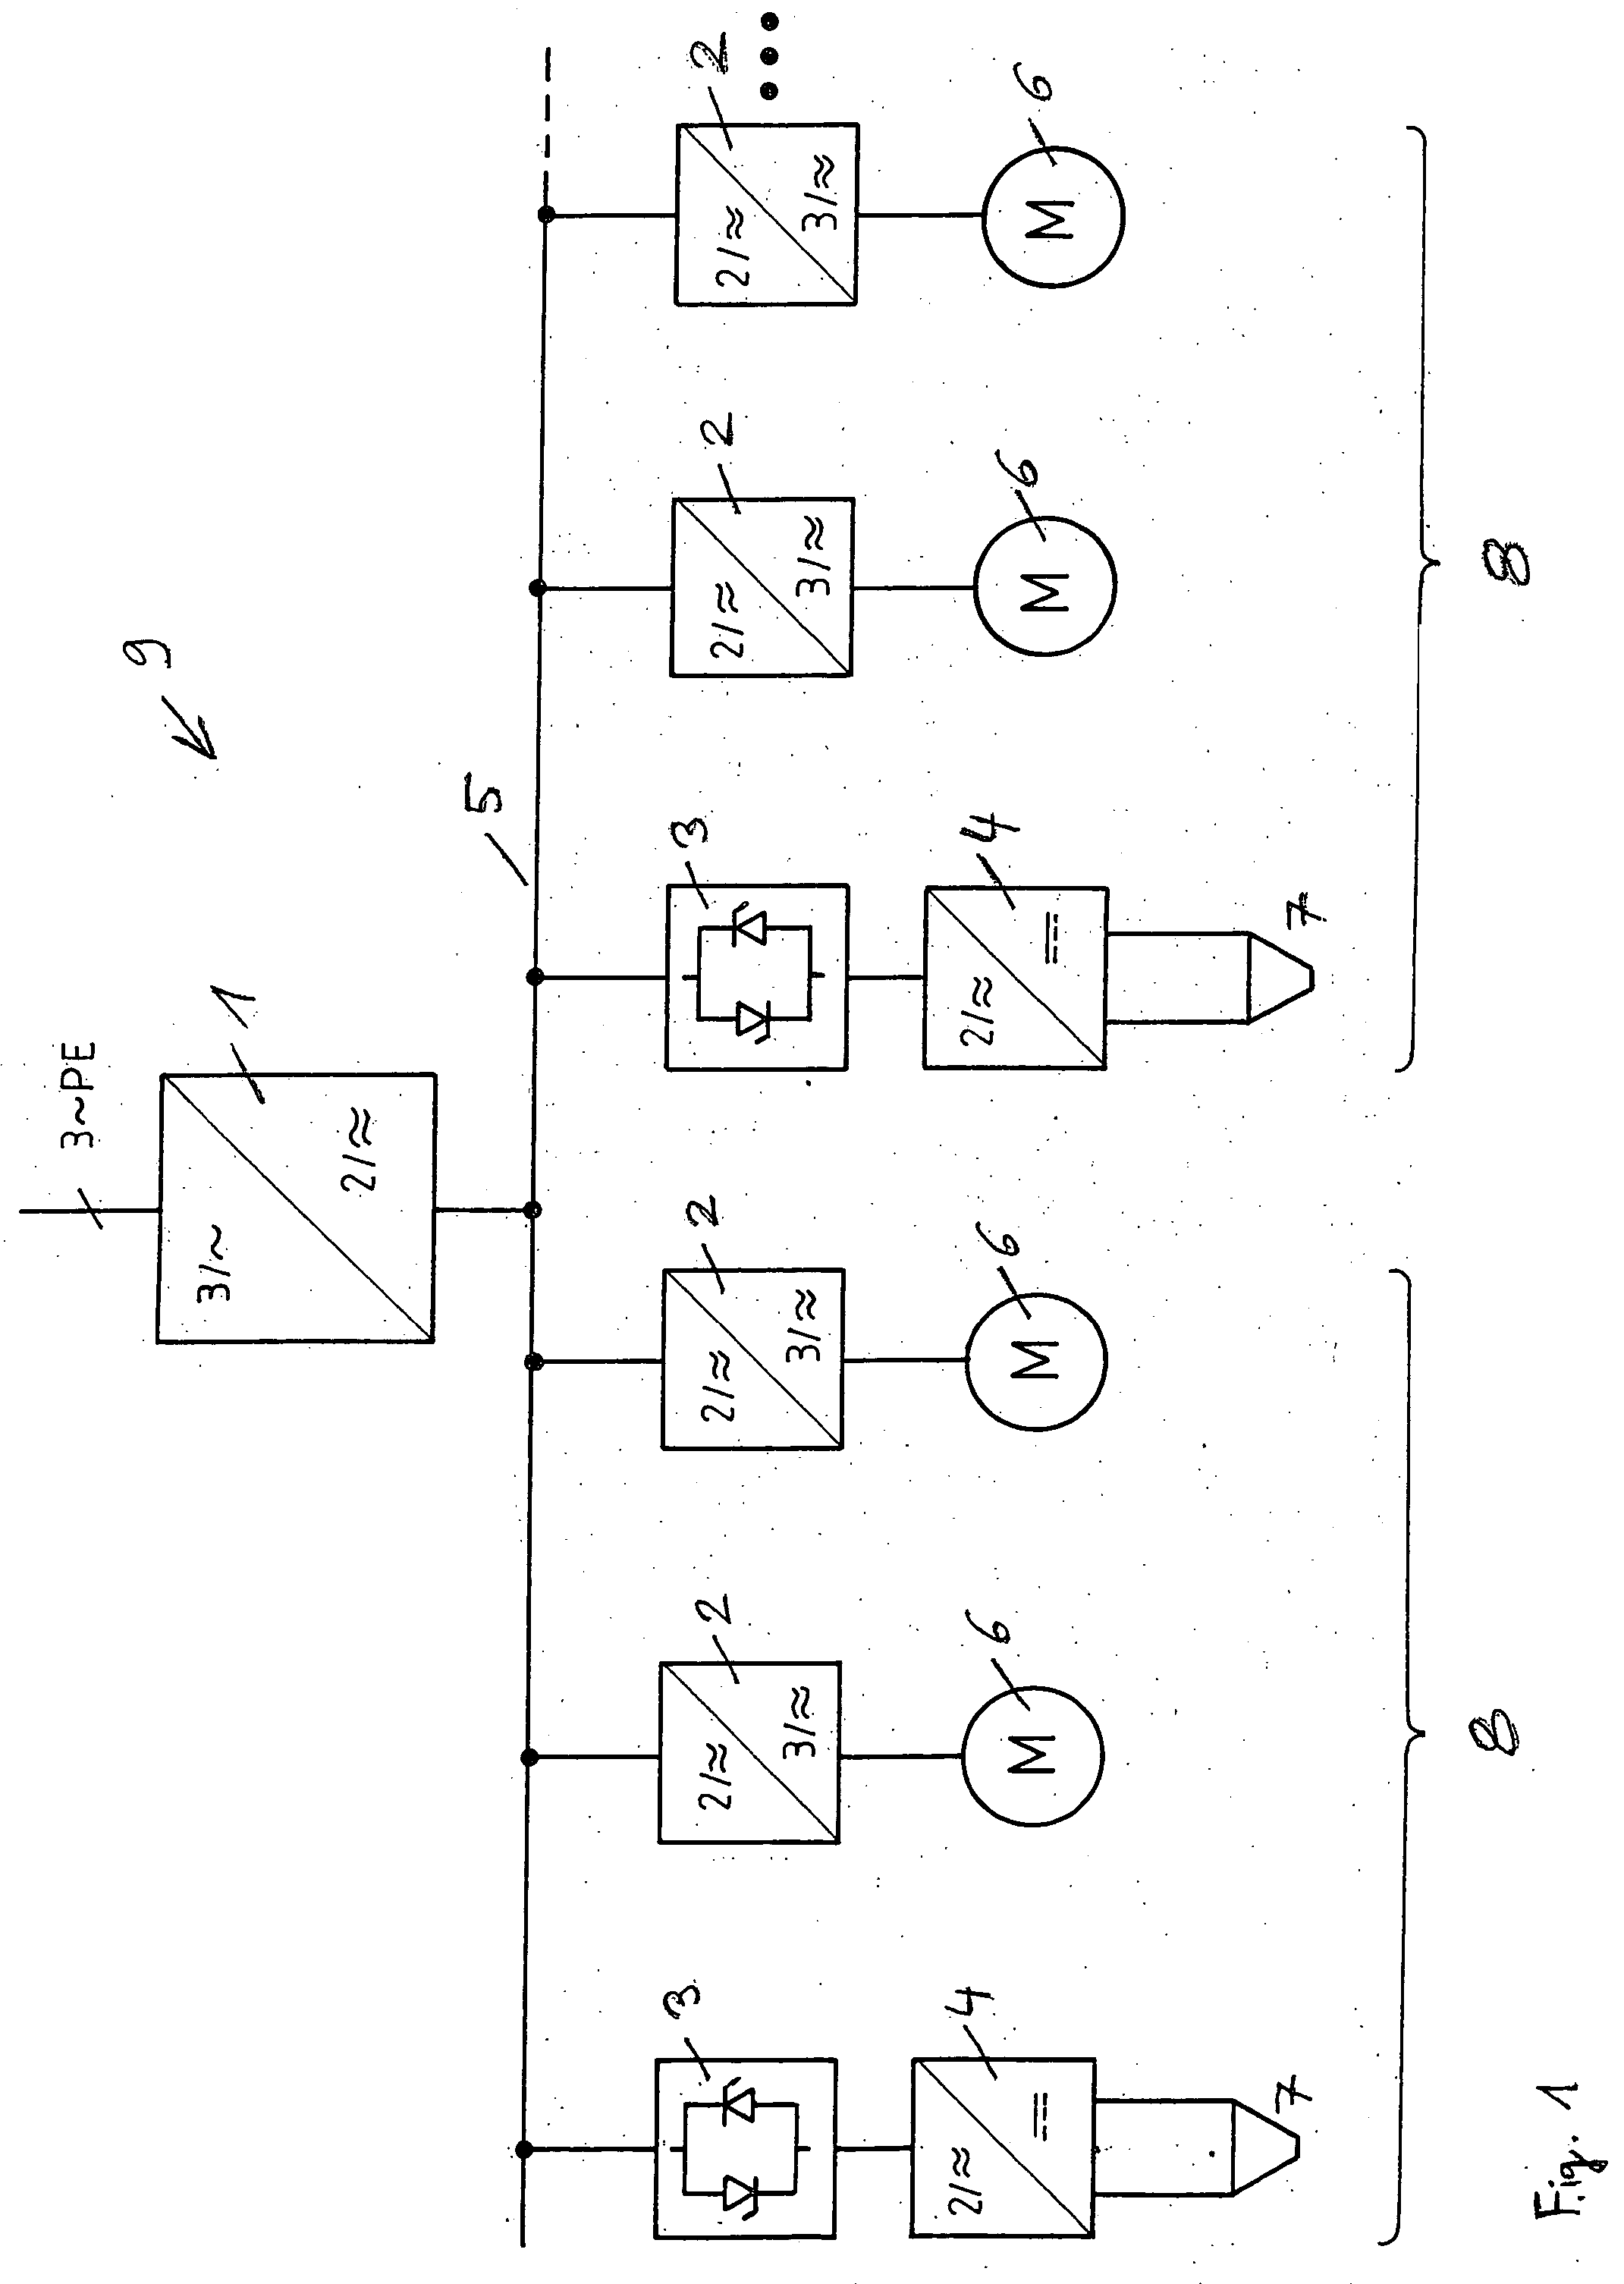 Power supply for resistance welding units